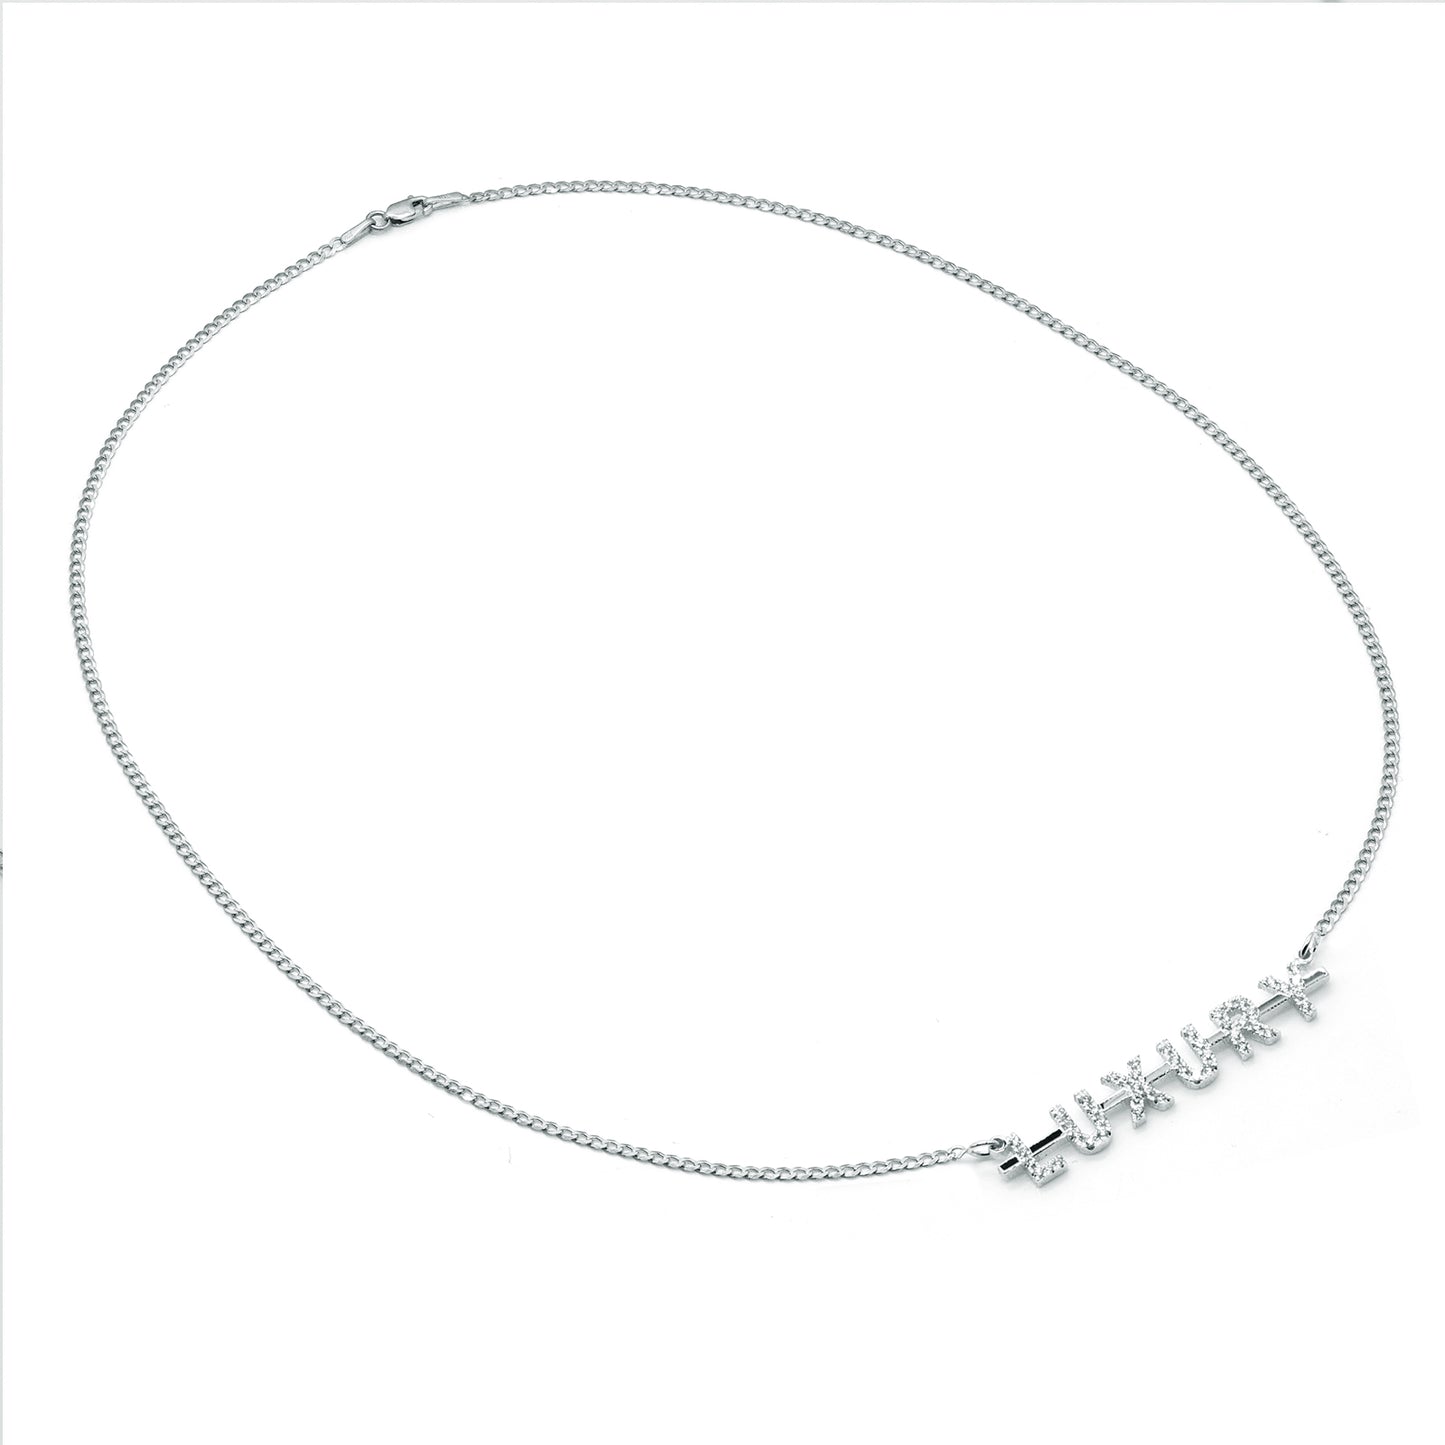 Strikethrough Name with Pave Diamonds on Curb Chain Necklace in 14K Gold